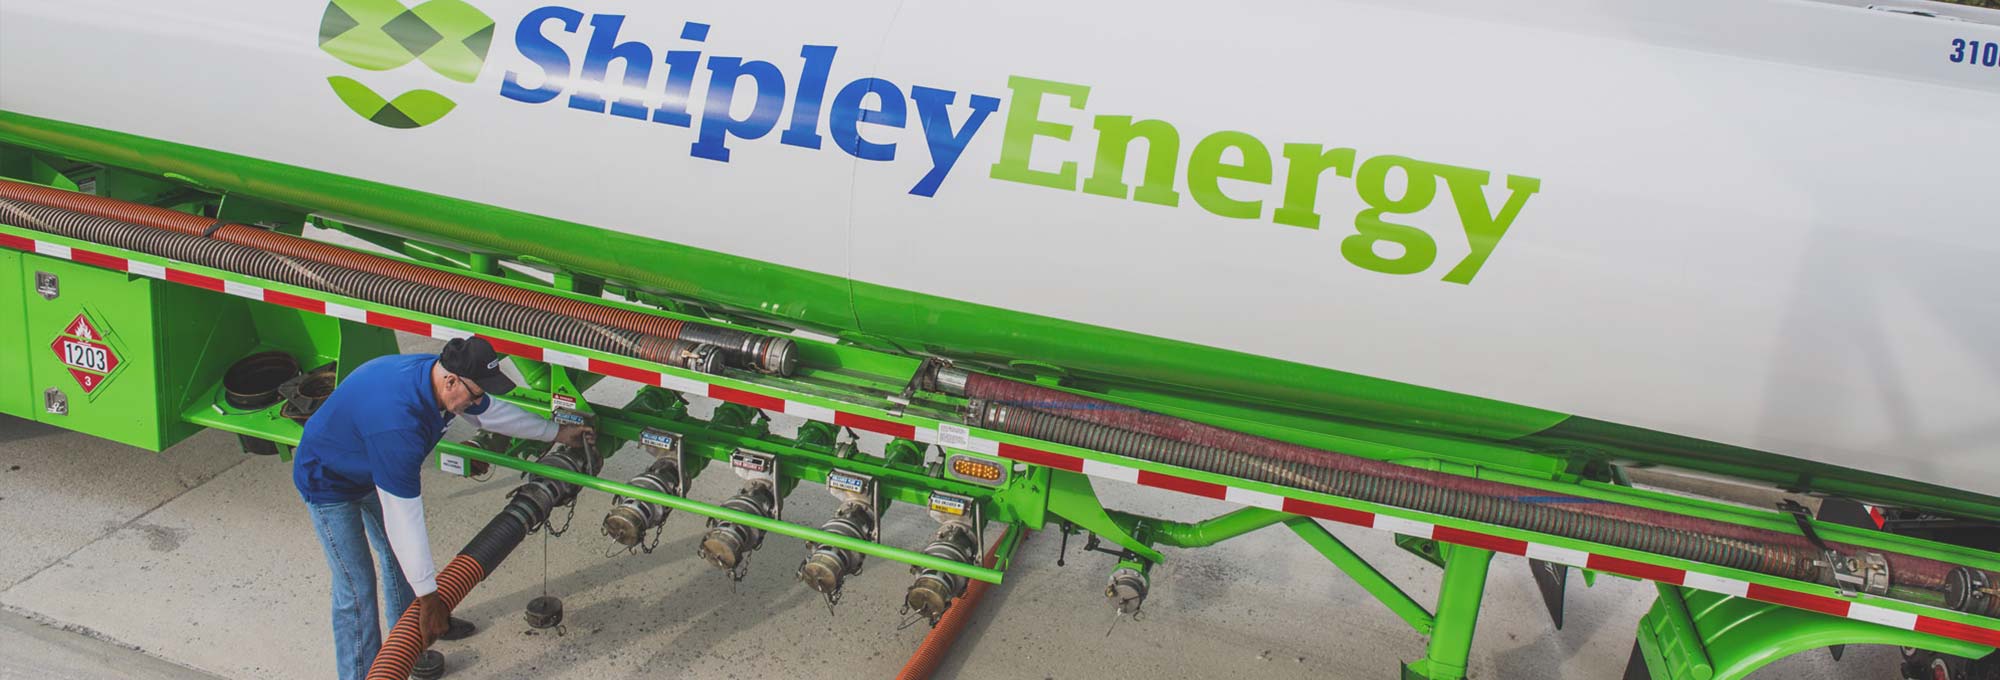 Warm up This Winter With Shipley Energy